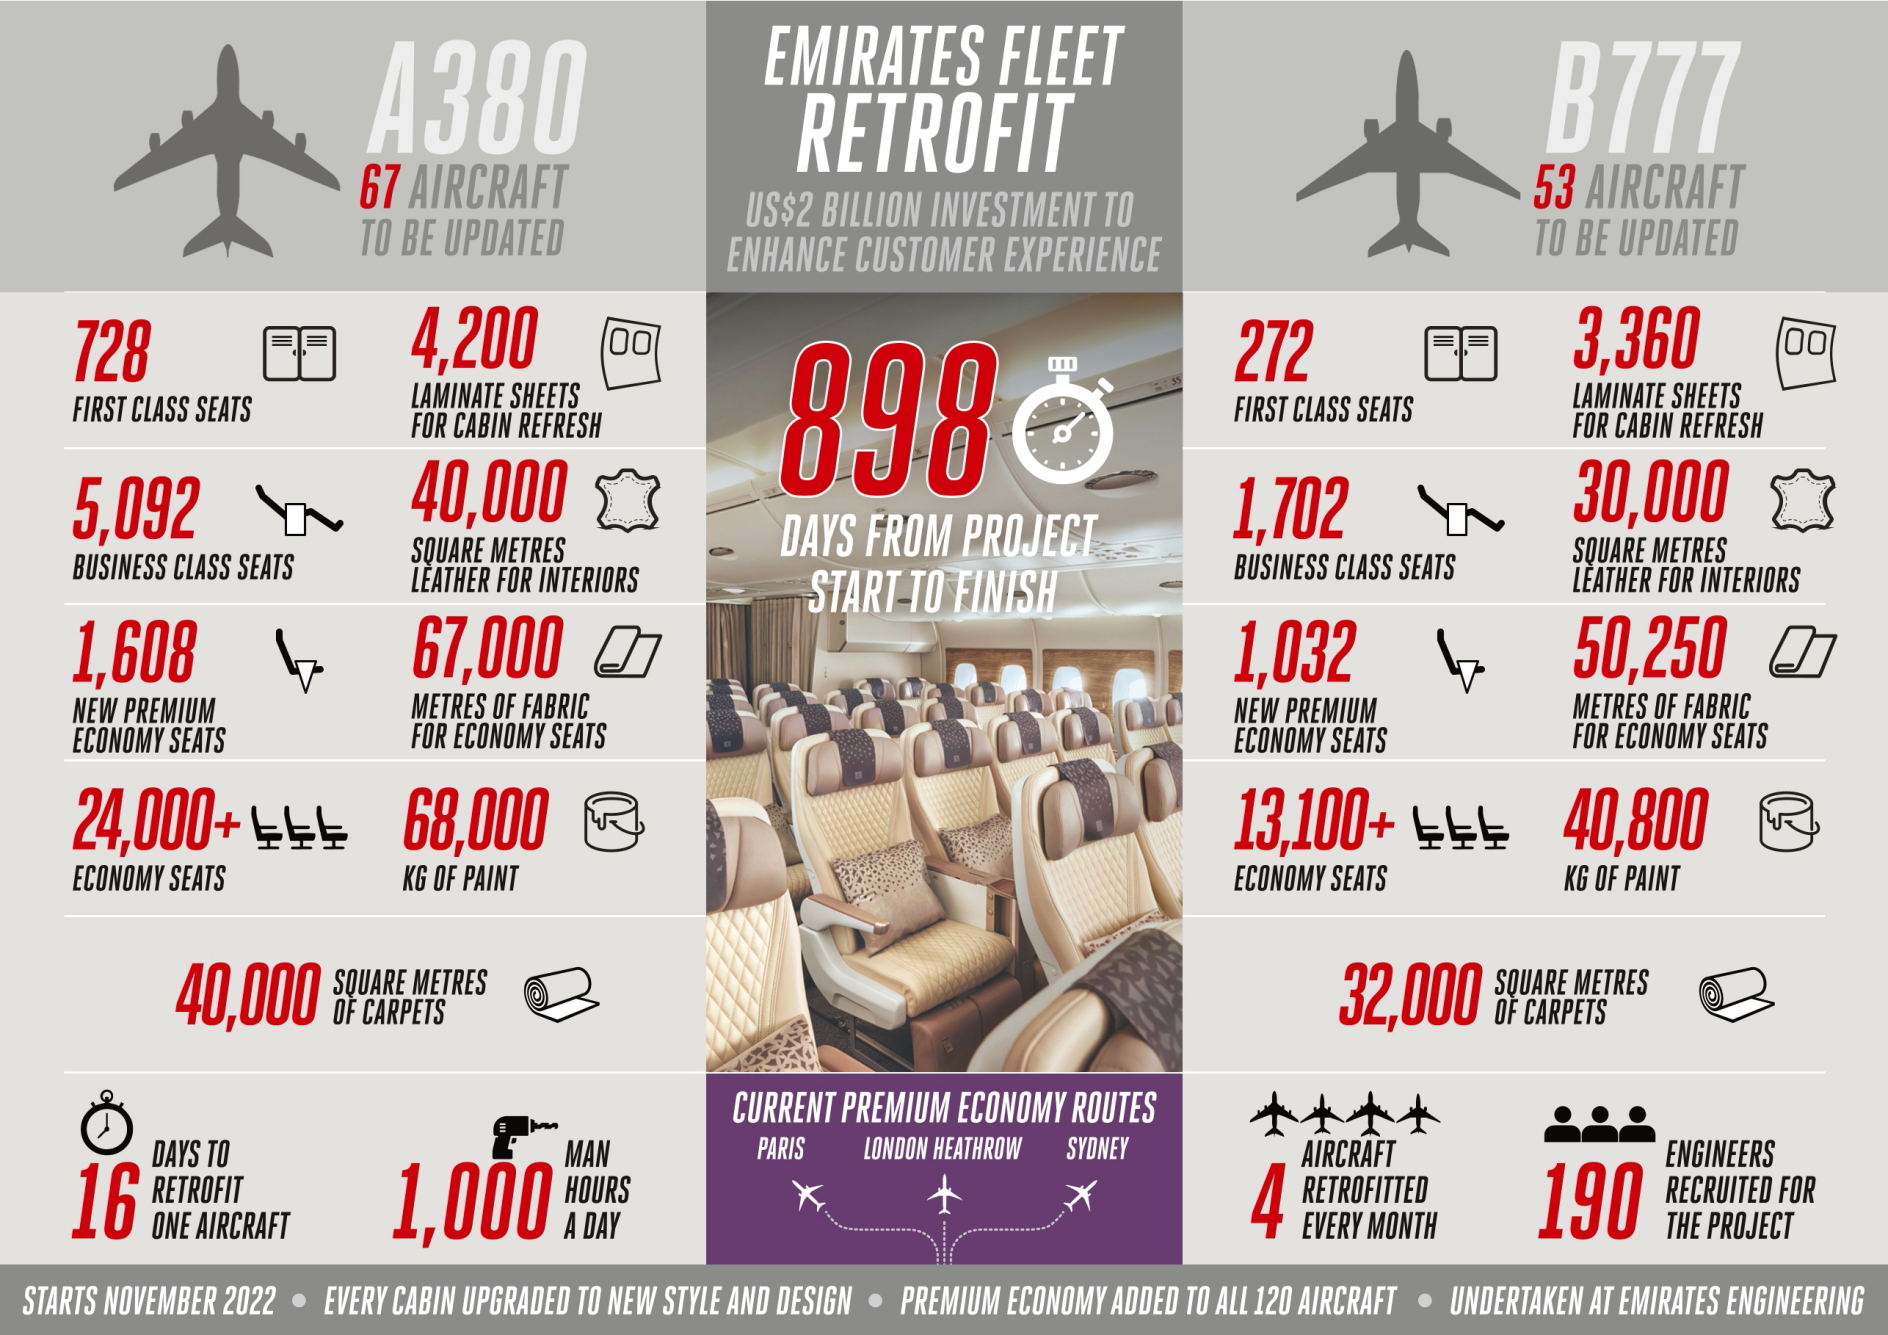 Emirates believes the retrofit project will take 898 days to complete. Click to enlarge.